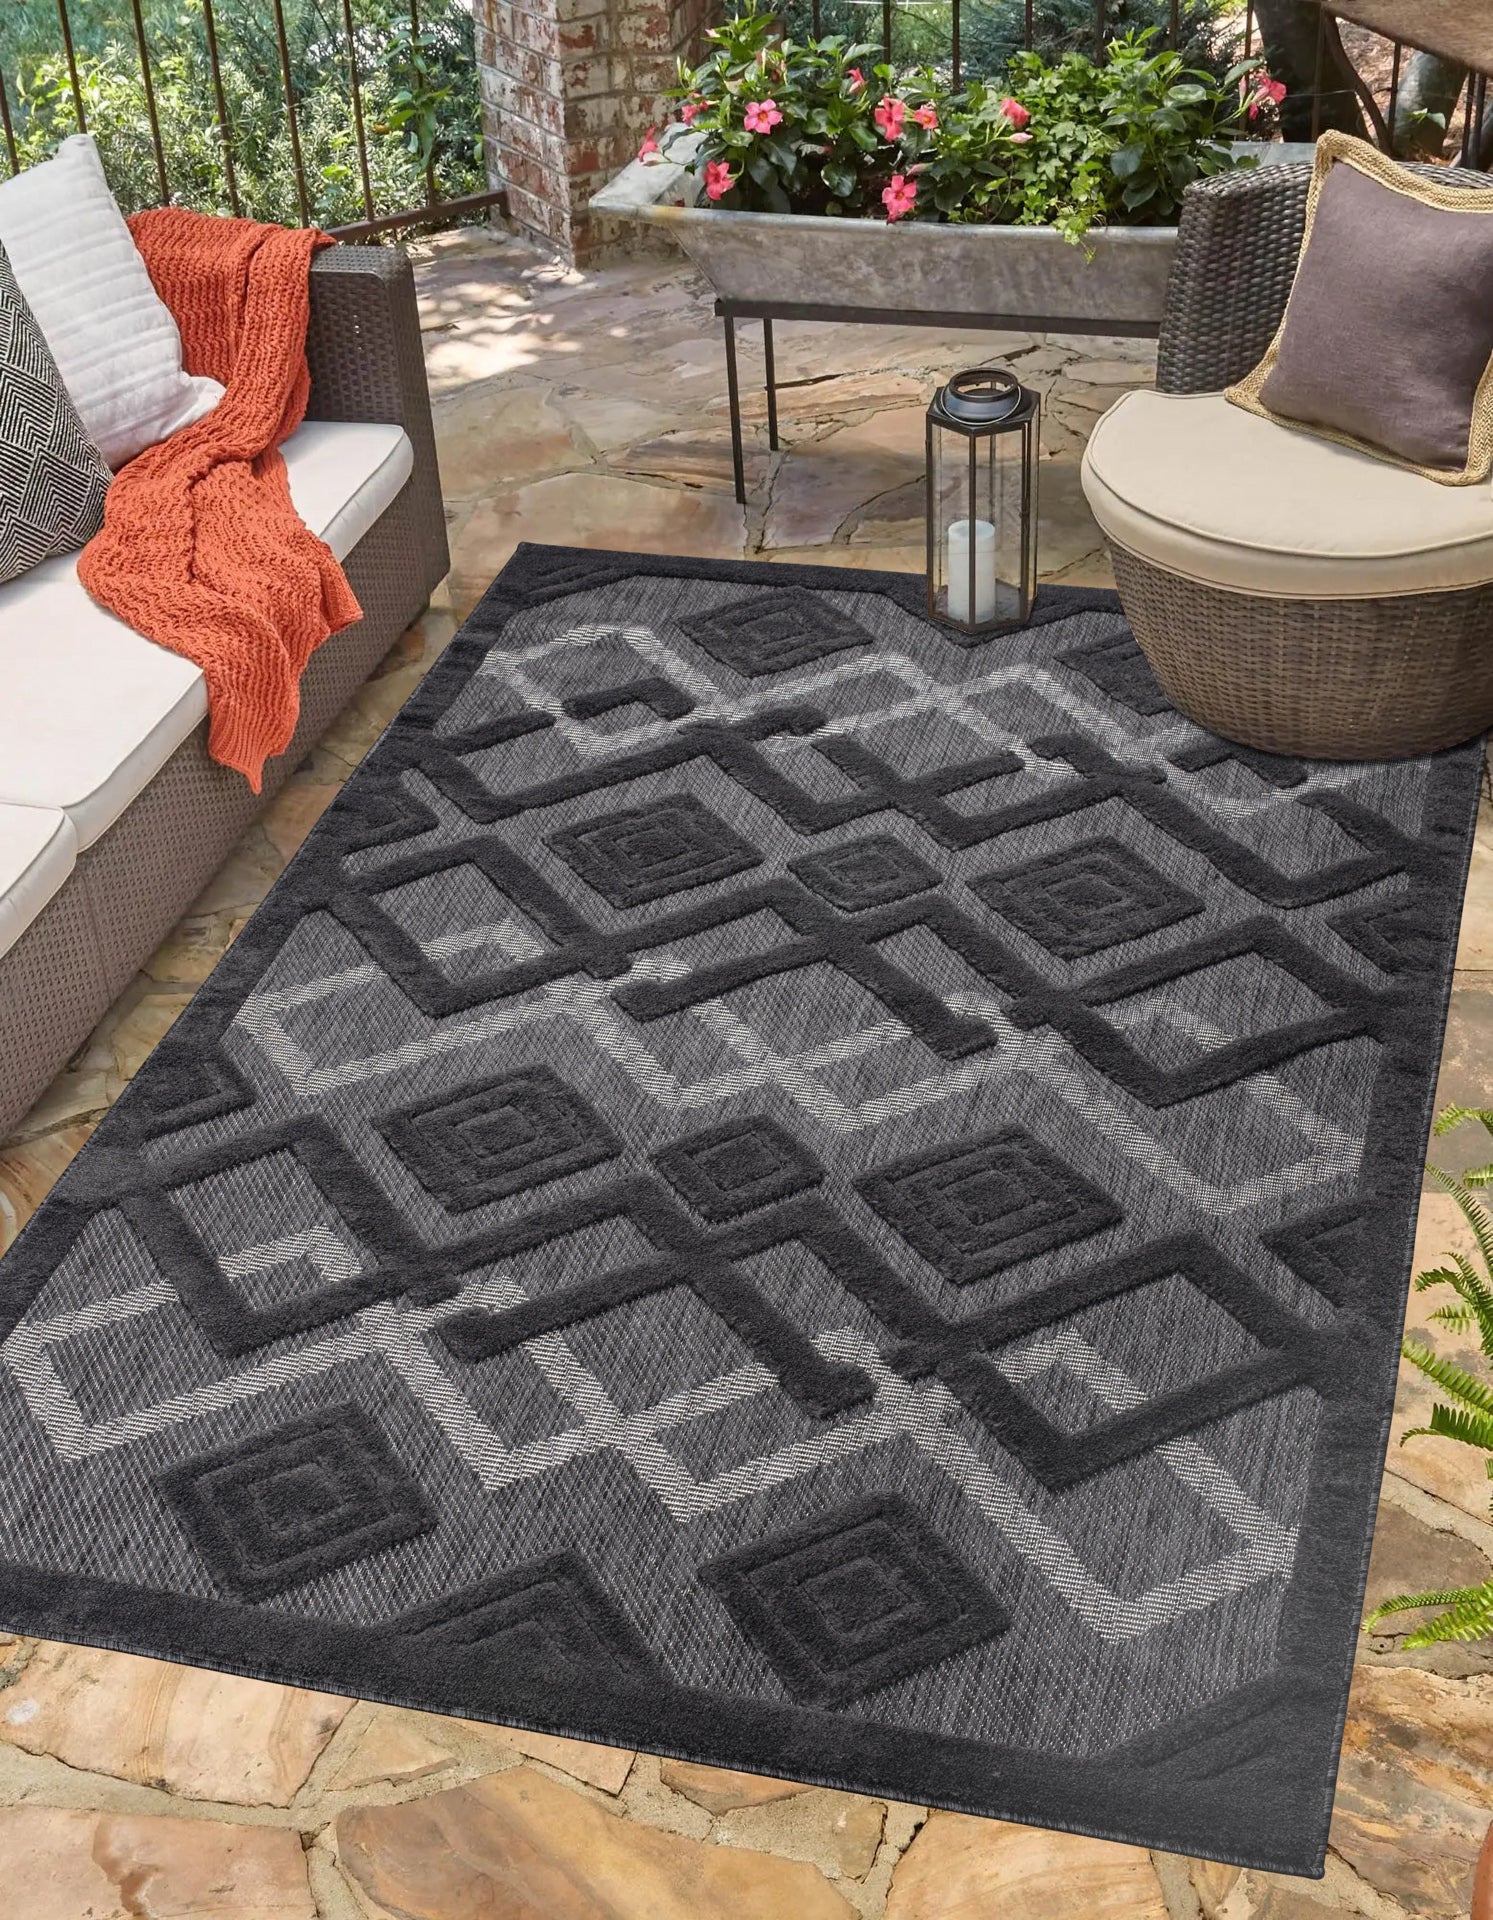 geometric modern minimalist contemporary outdoor indoor area rug carpet for patio porch dining area balcony living room bedroom 5x7, 5x8 ft Contemporary, Living Room Carpet, Bedroom, Home Office